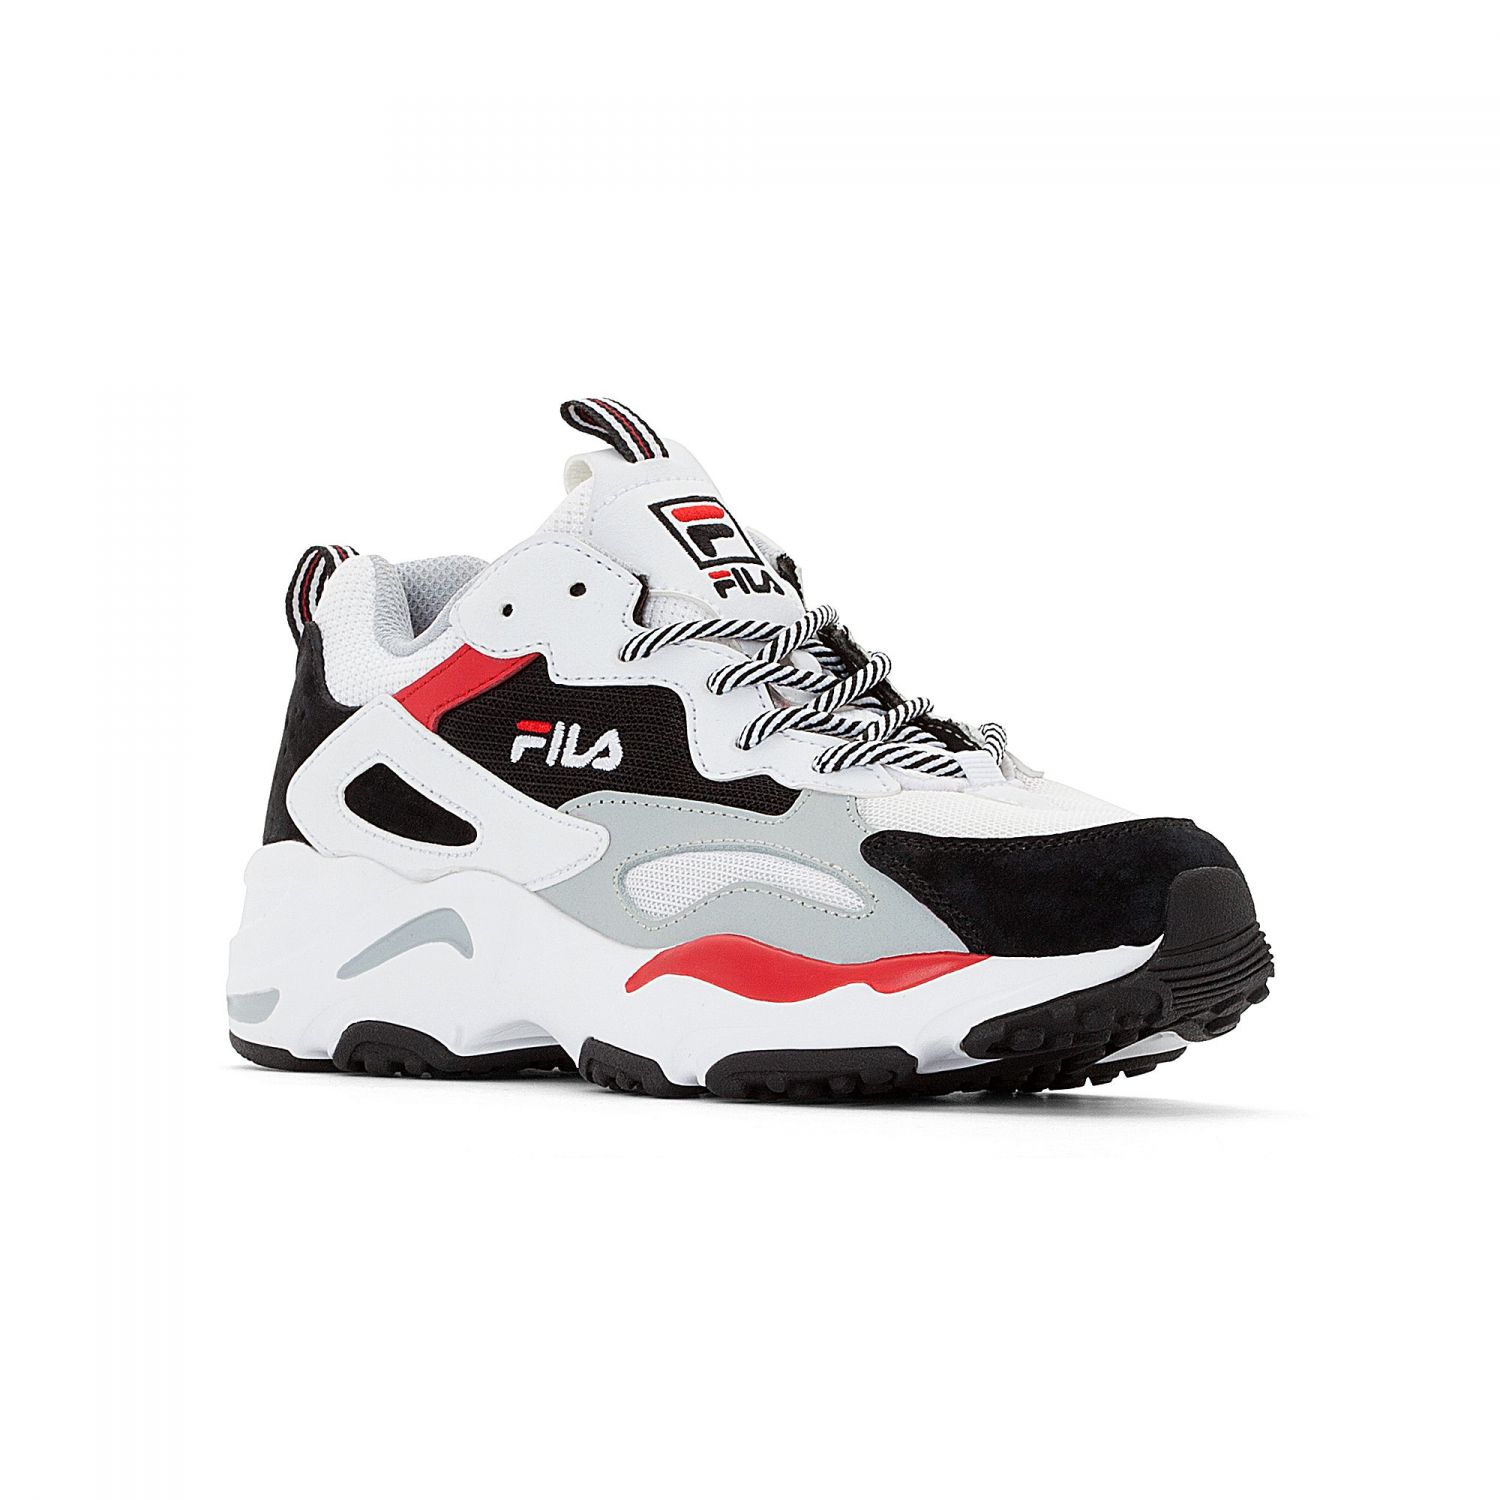 Fila Ray Tracer Wmn white-black-high rise - grey | FILA Official